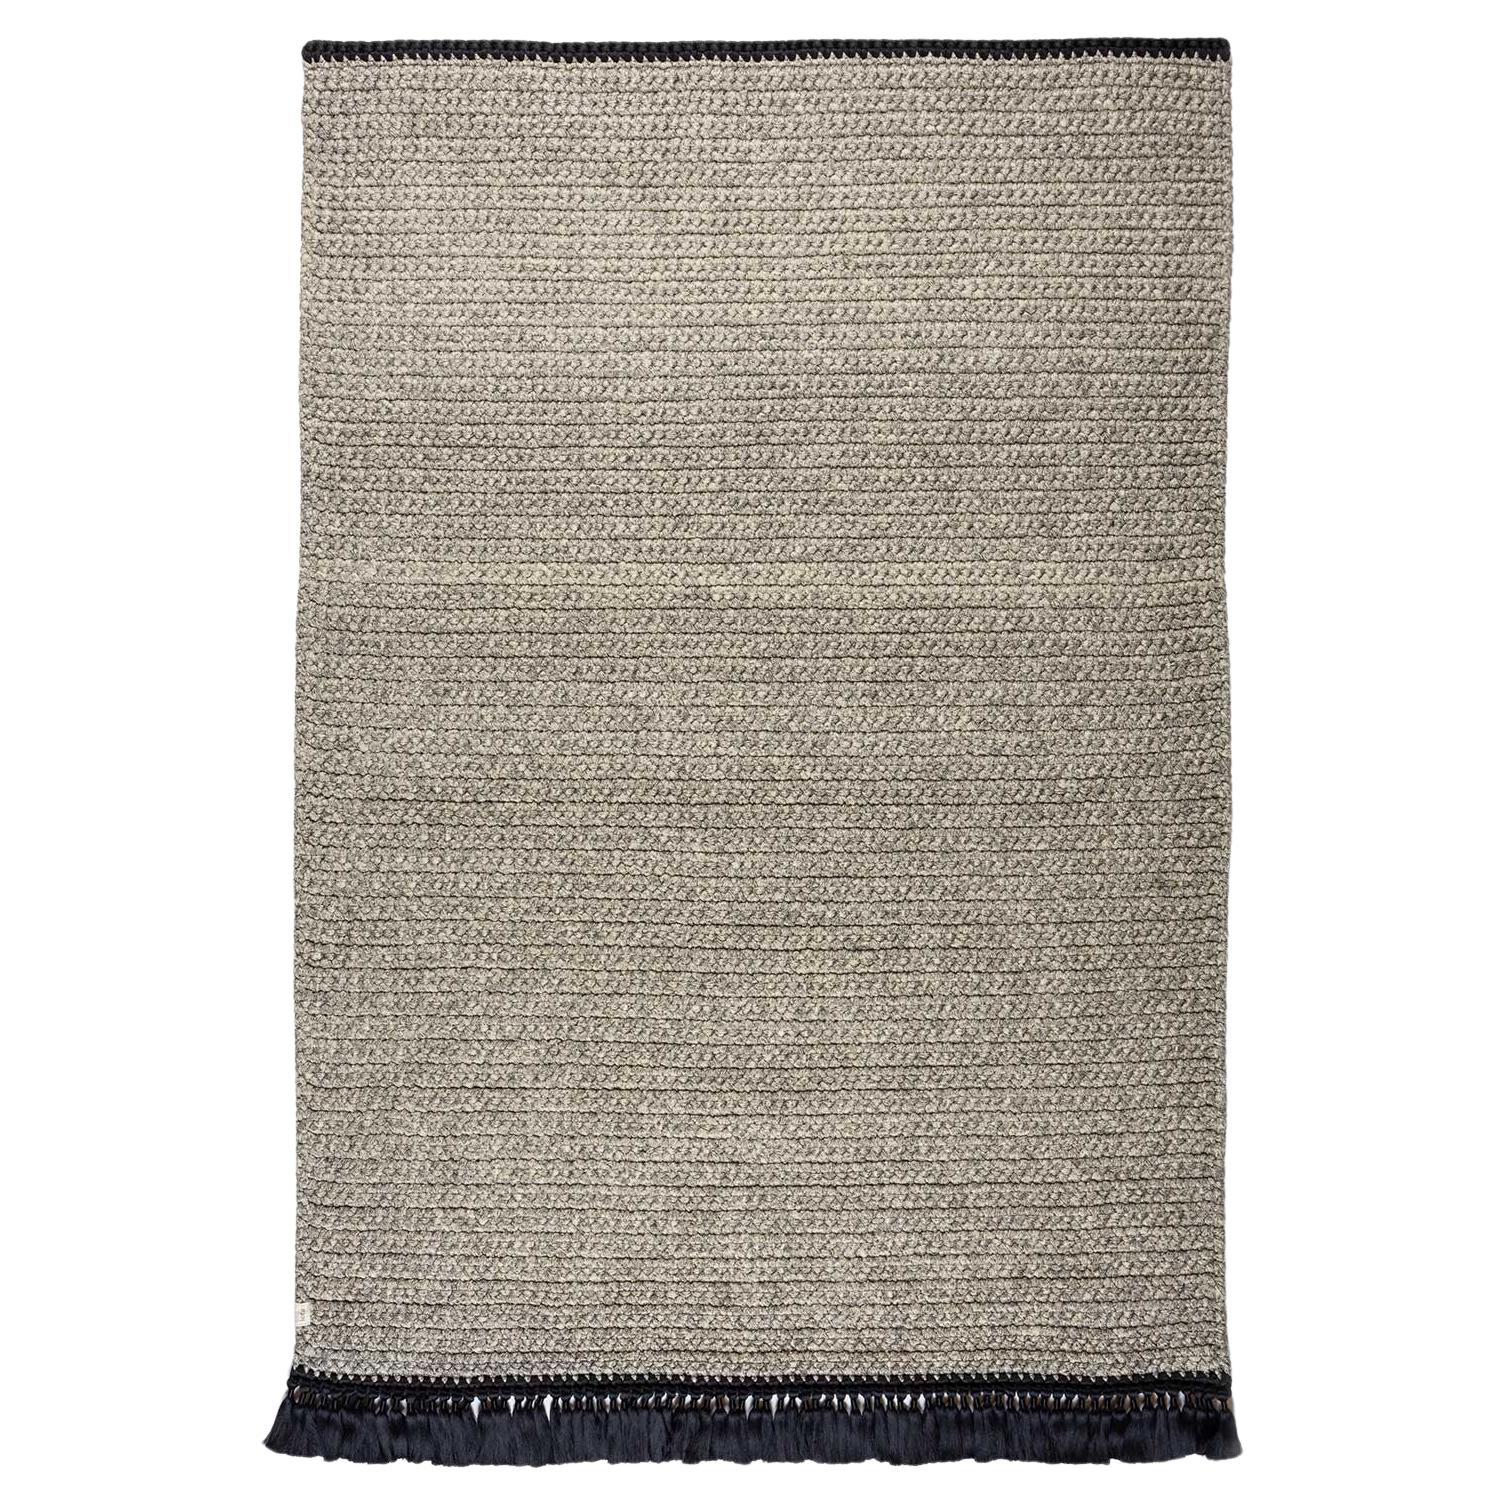 Handmade Crochet Thick Rug in Grey Beige Black Made of Cotton & Polyester